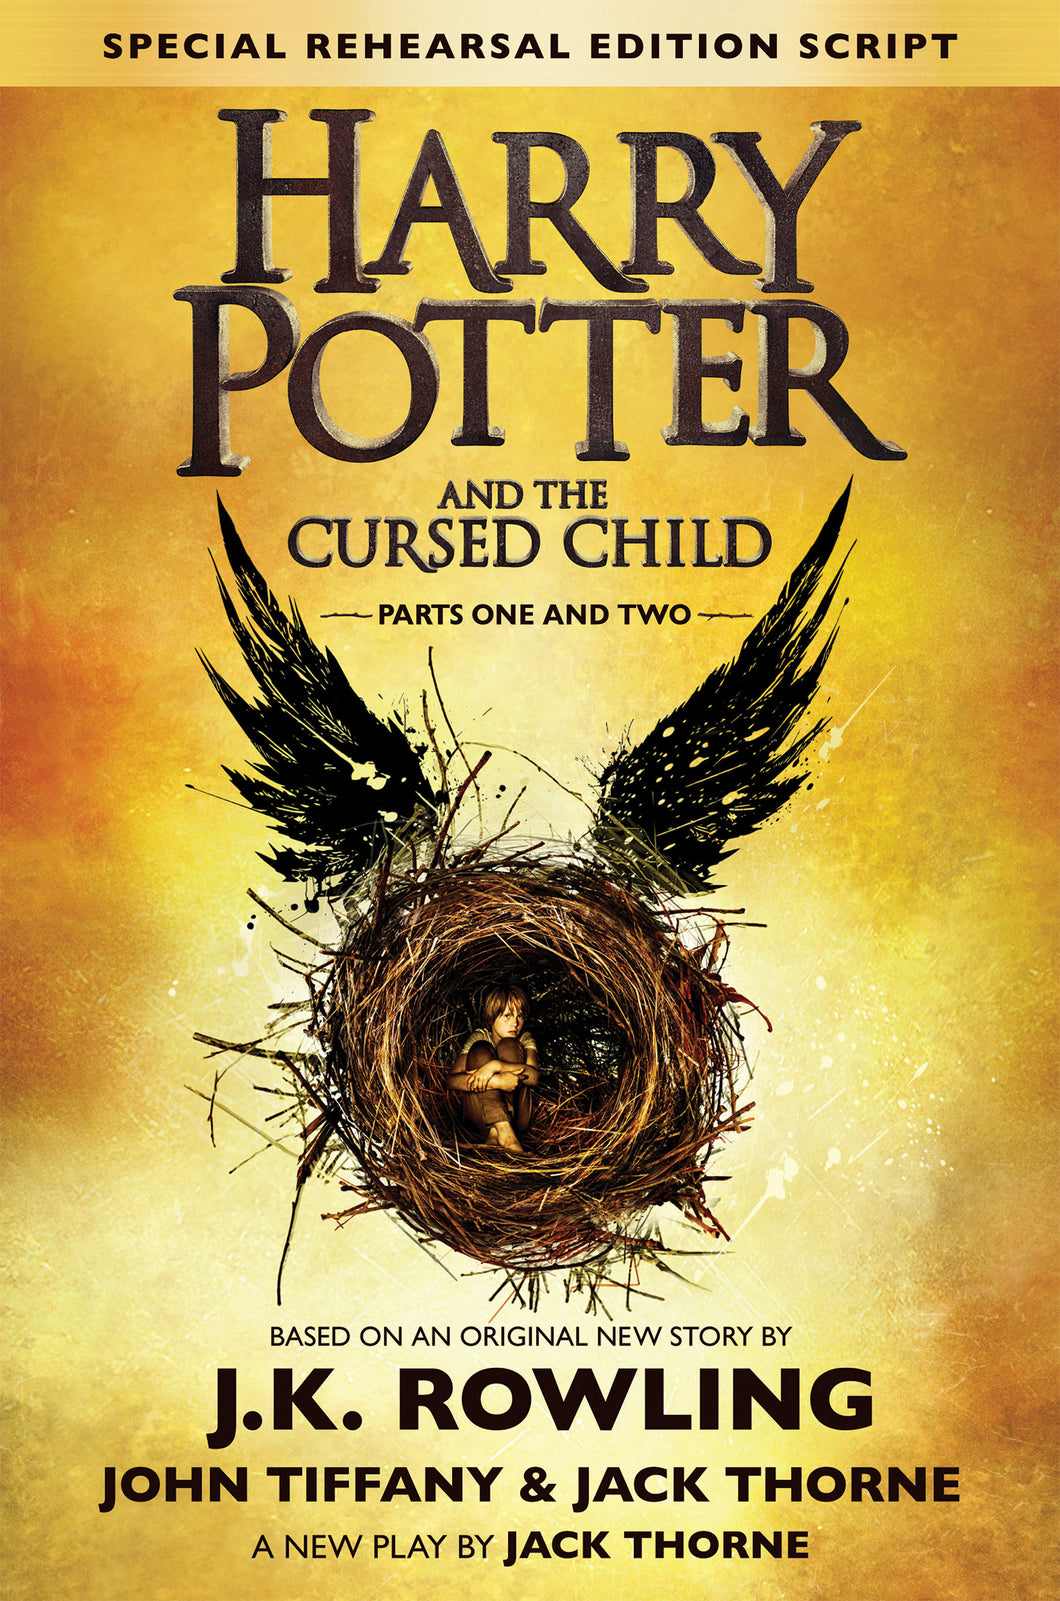 Harry Potter and the Cursed Child Parts One and Two (Special Rehearsal Edition Script) (Special Rehearsal Edition)